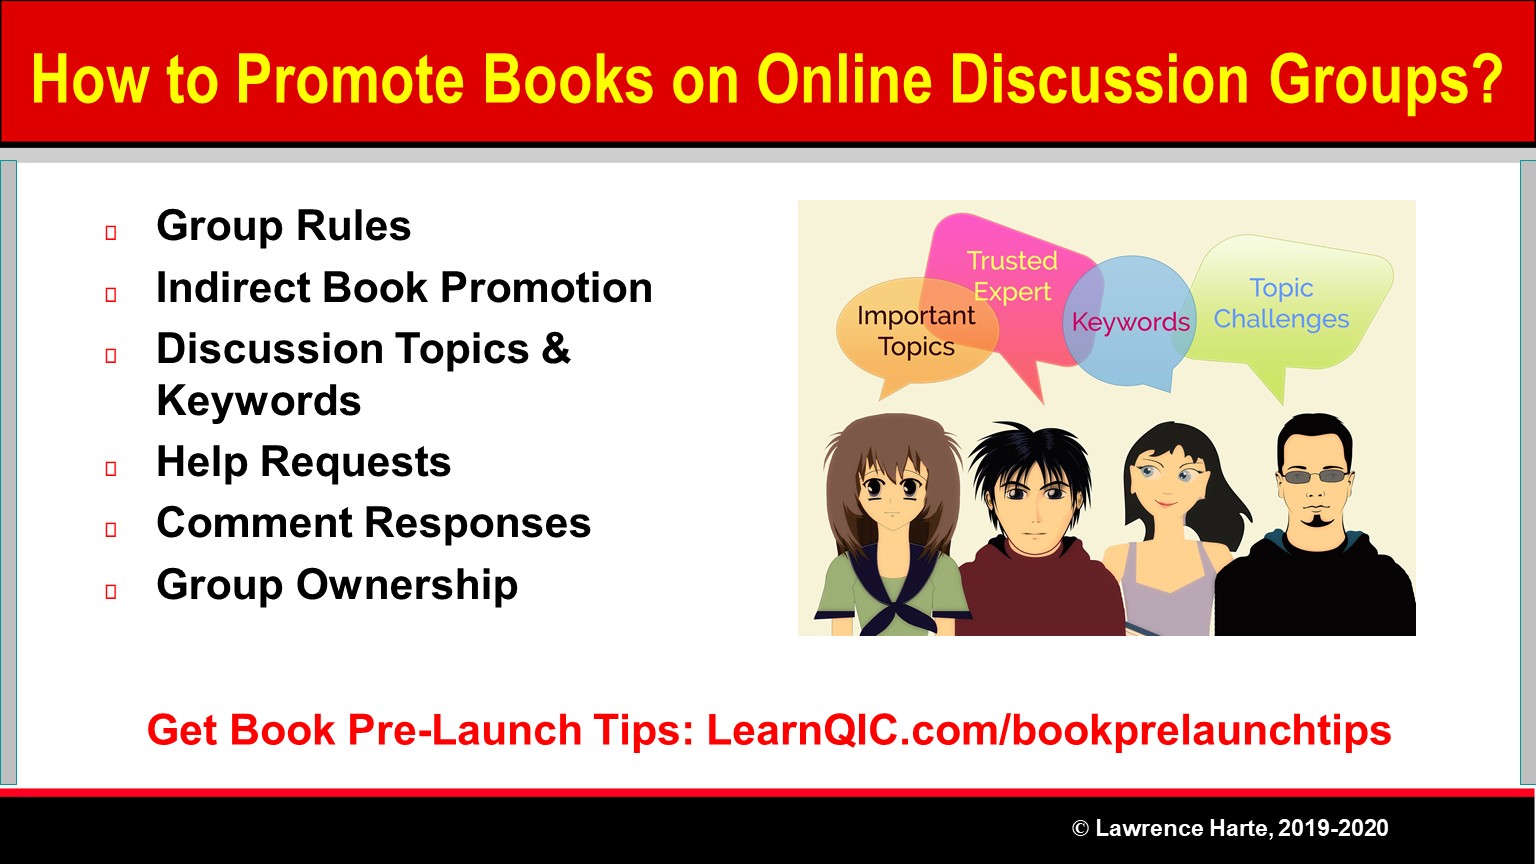 How to Promote Books on Online Discussion Groups?